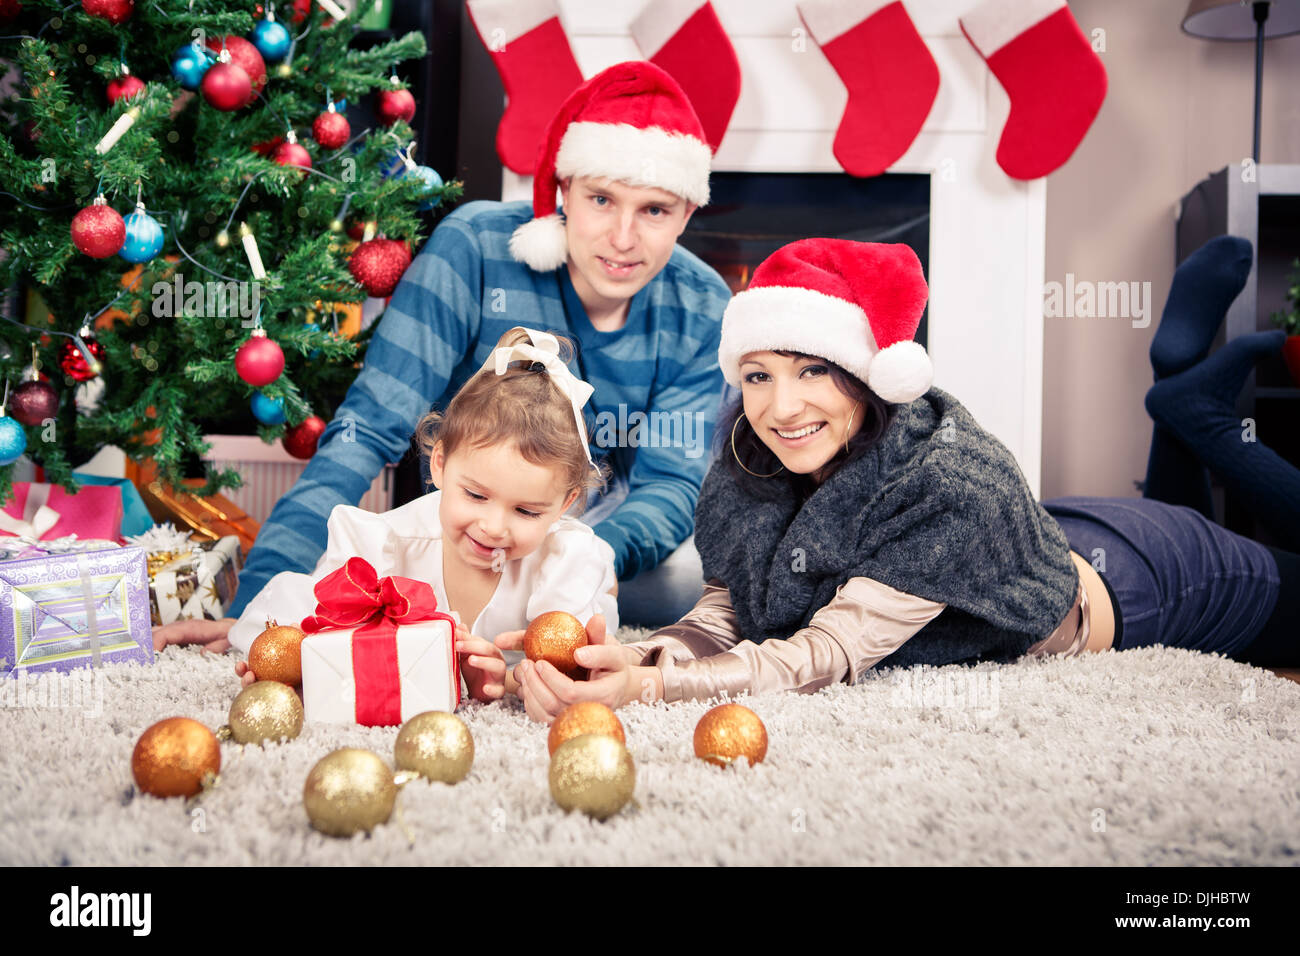 young family in front of christmas tree Stock Photo